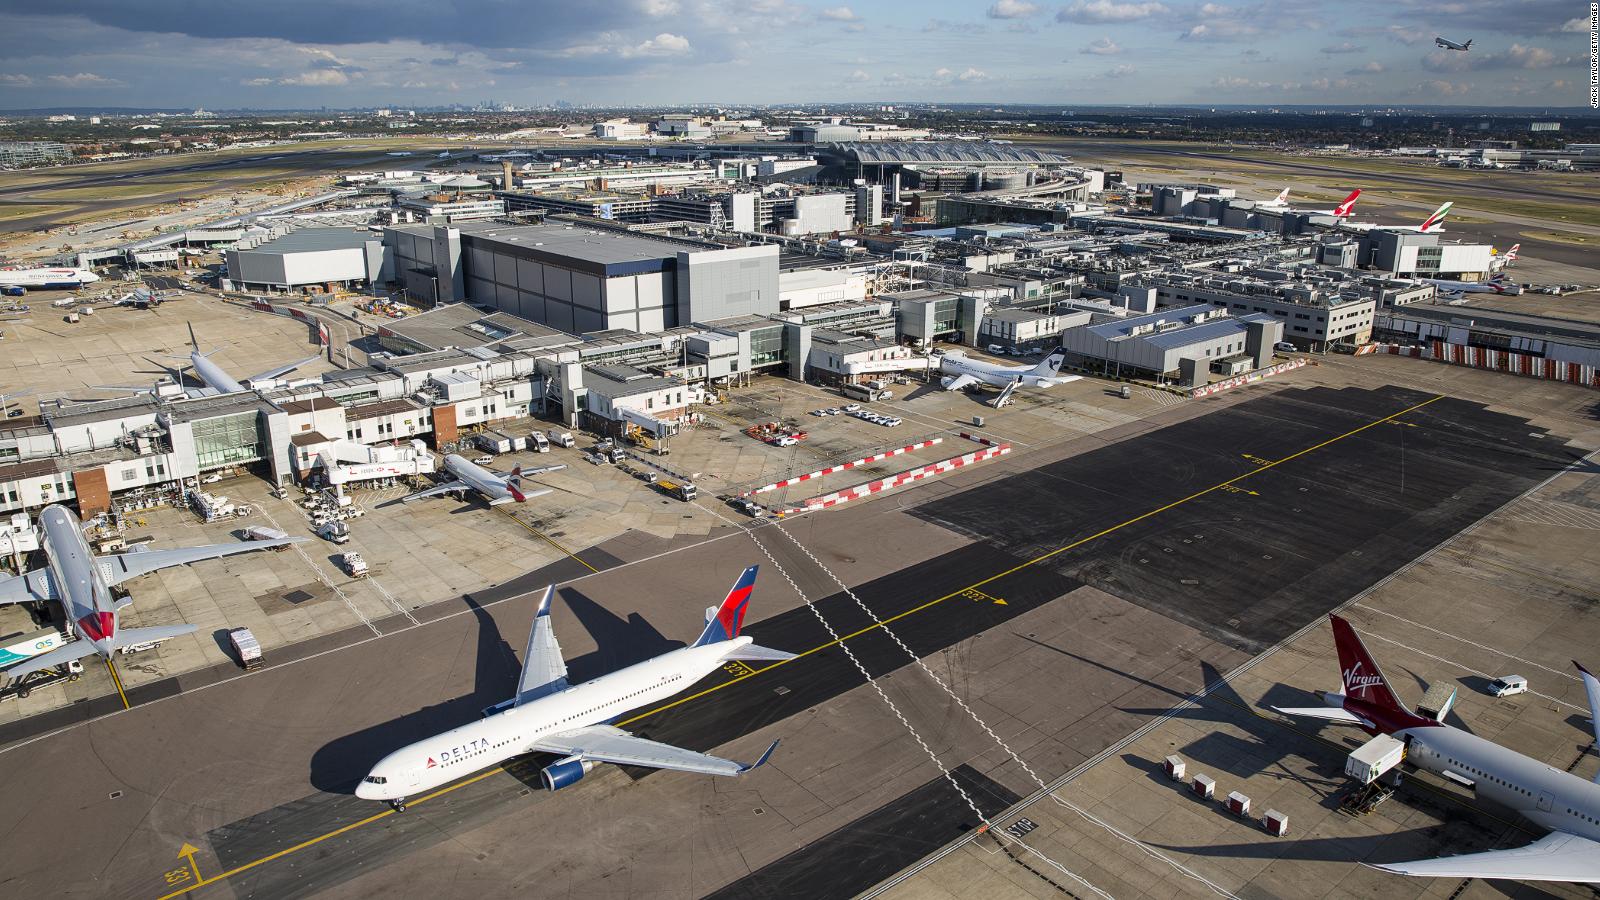 The Best London Airport To Fly Into Heathrow Gatwick Stansted